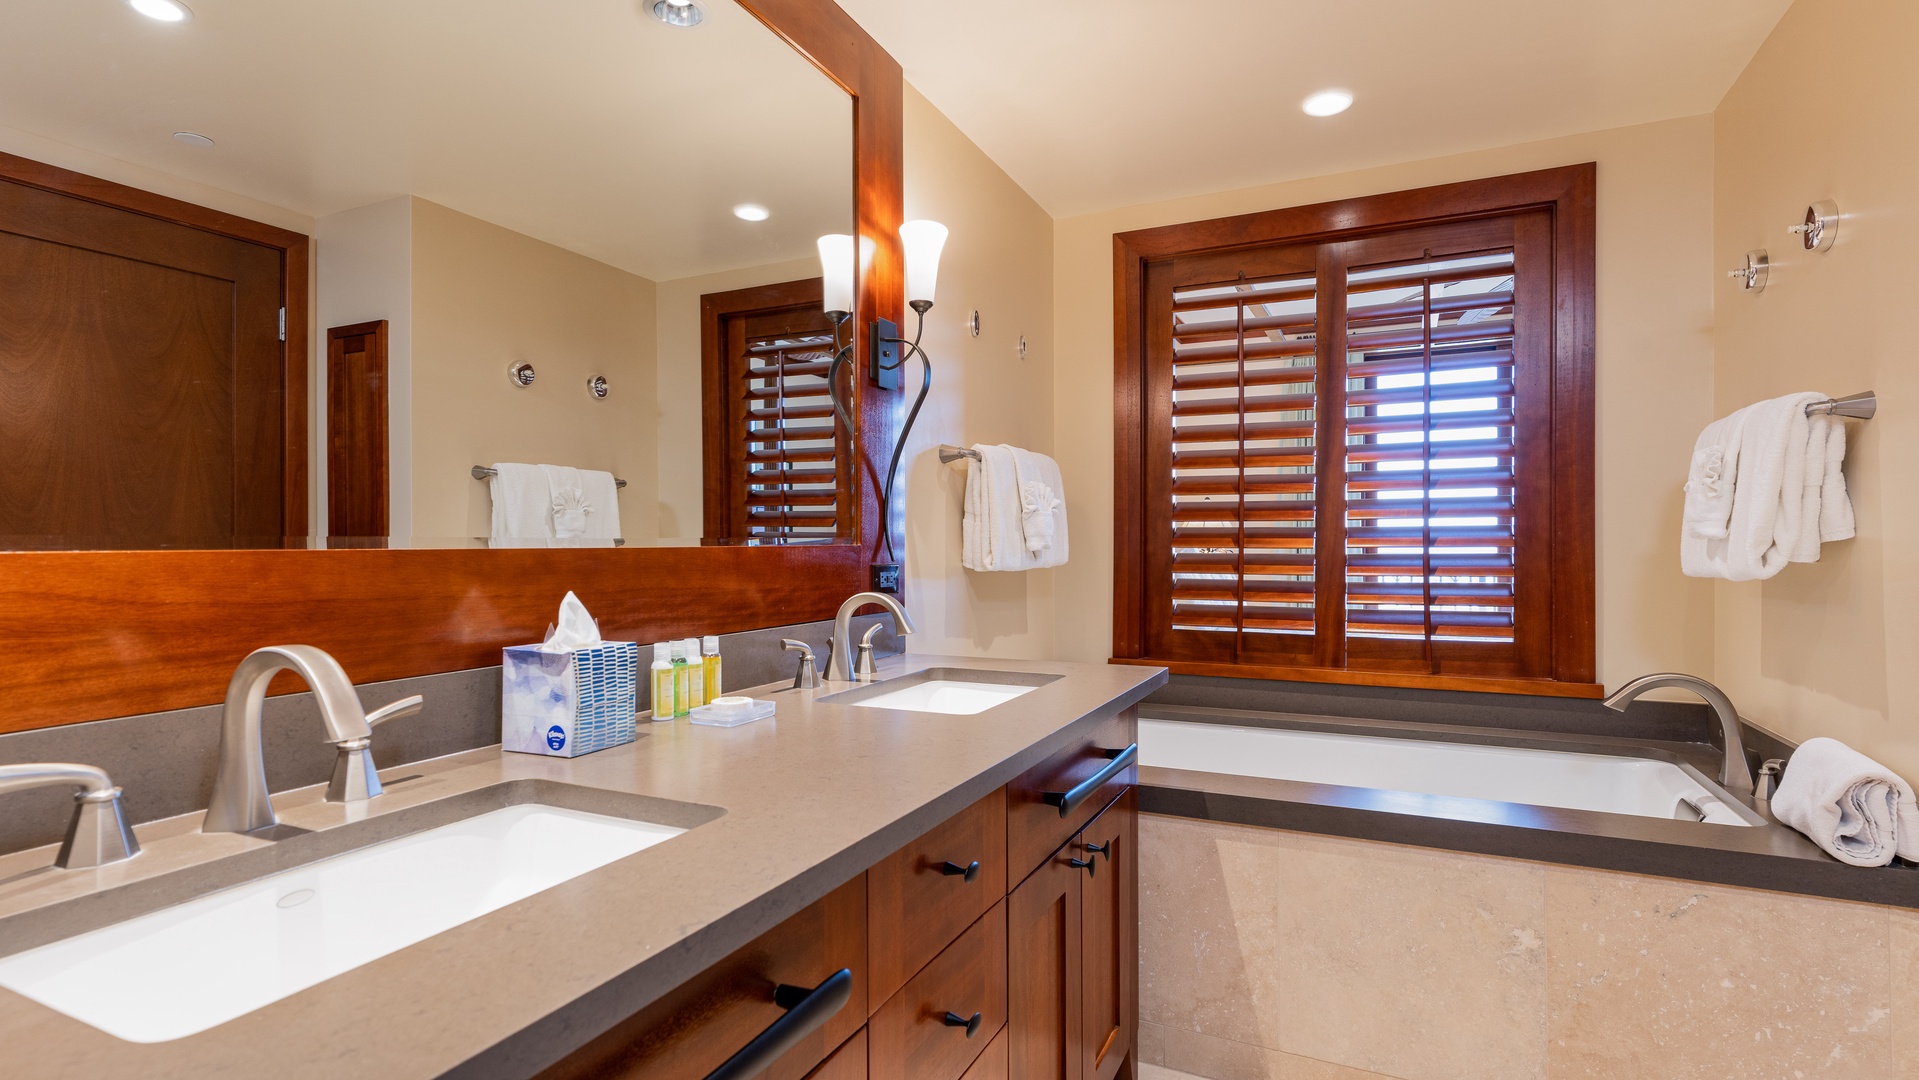 Kapolei Vacation Rentals, Ko Olina Beach Villas B701 - The primary guest bathroom features a luxurious soaking tub and walk-in shower.